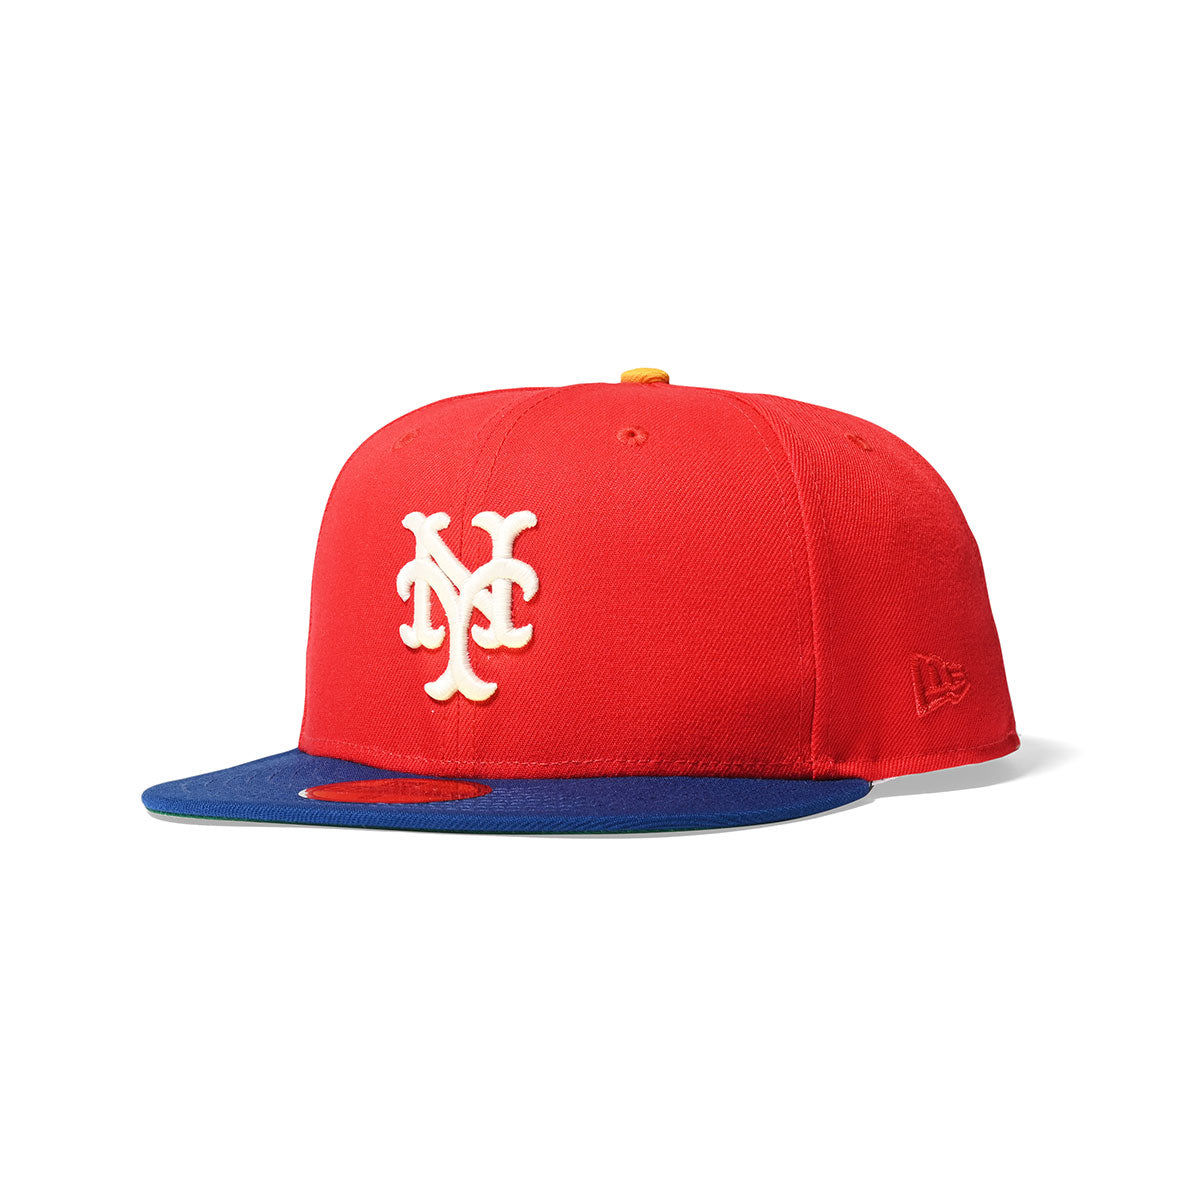 NEW ERA New York Mets - 59FIFTY 1969 LETS GO METS FD RED/L ROYAL【70815007】